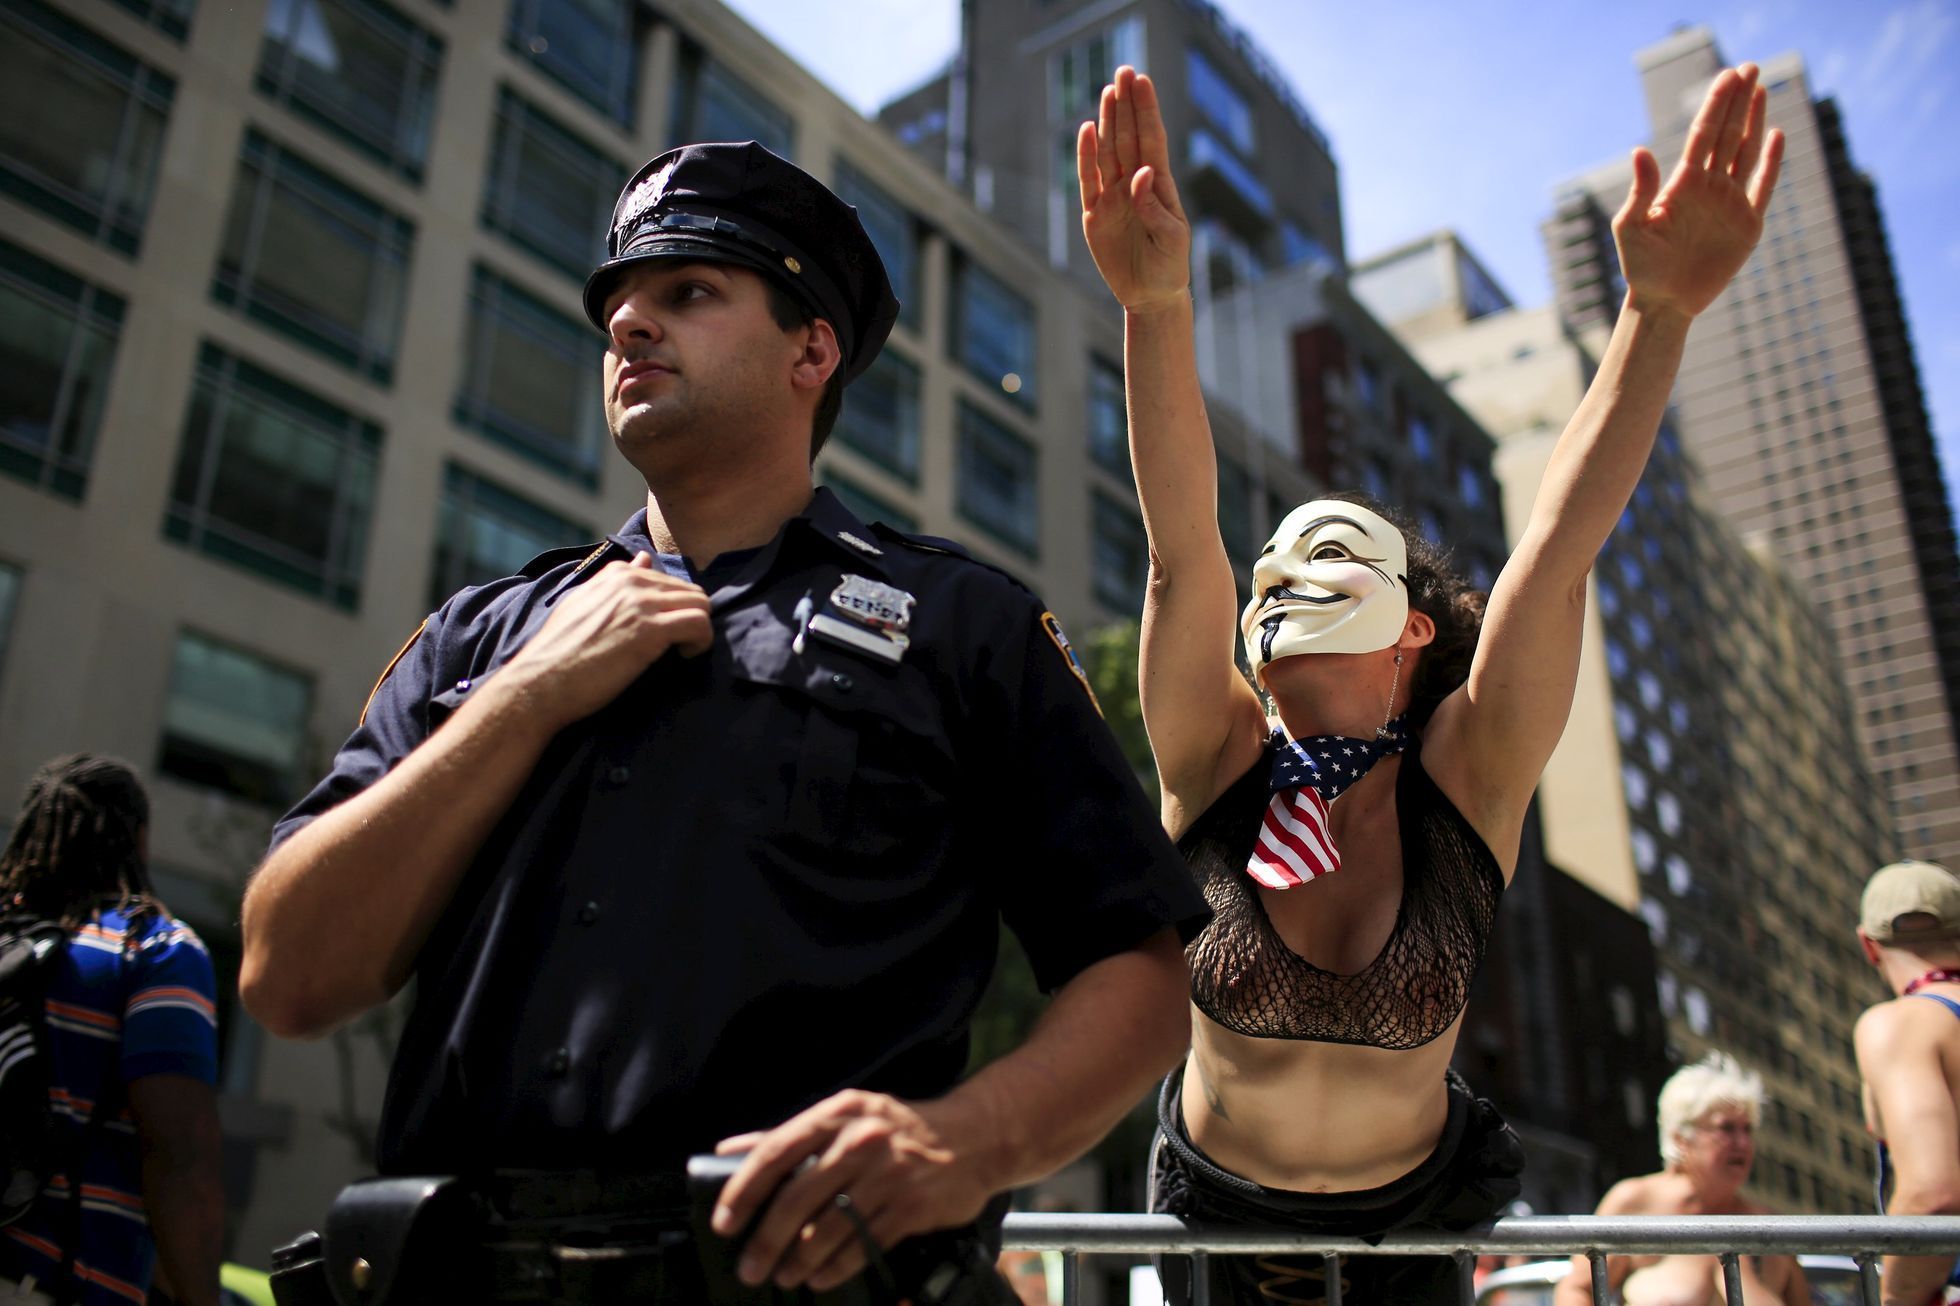 A woman gestures next to a New York Police Officer while she awaits the start of a topless march in New York